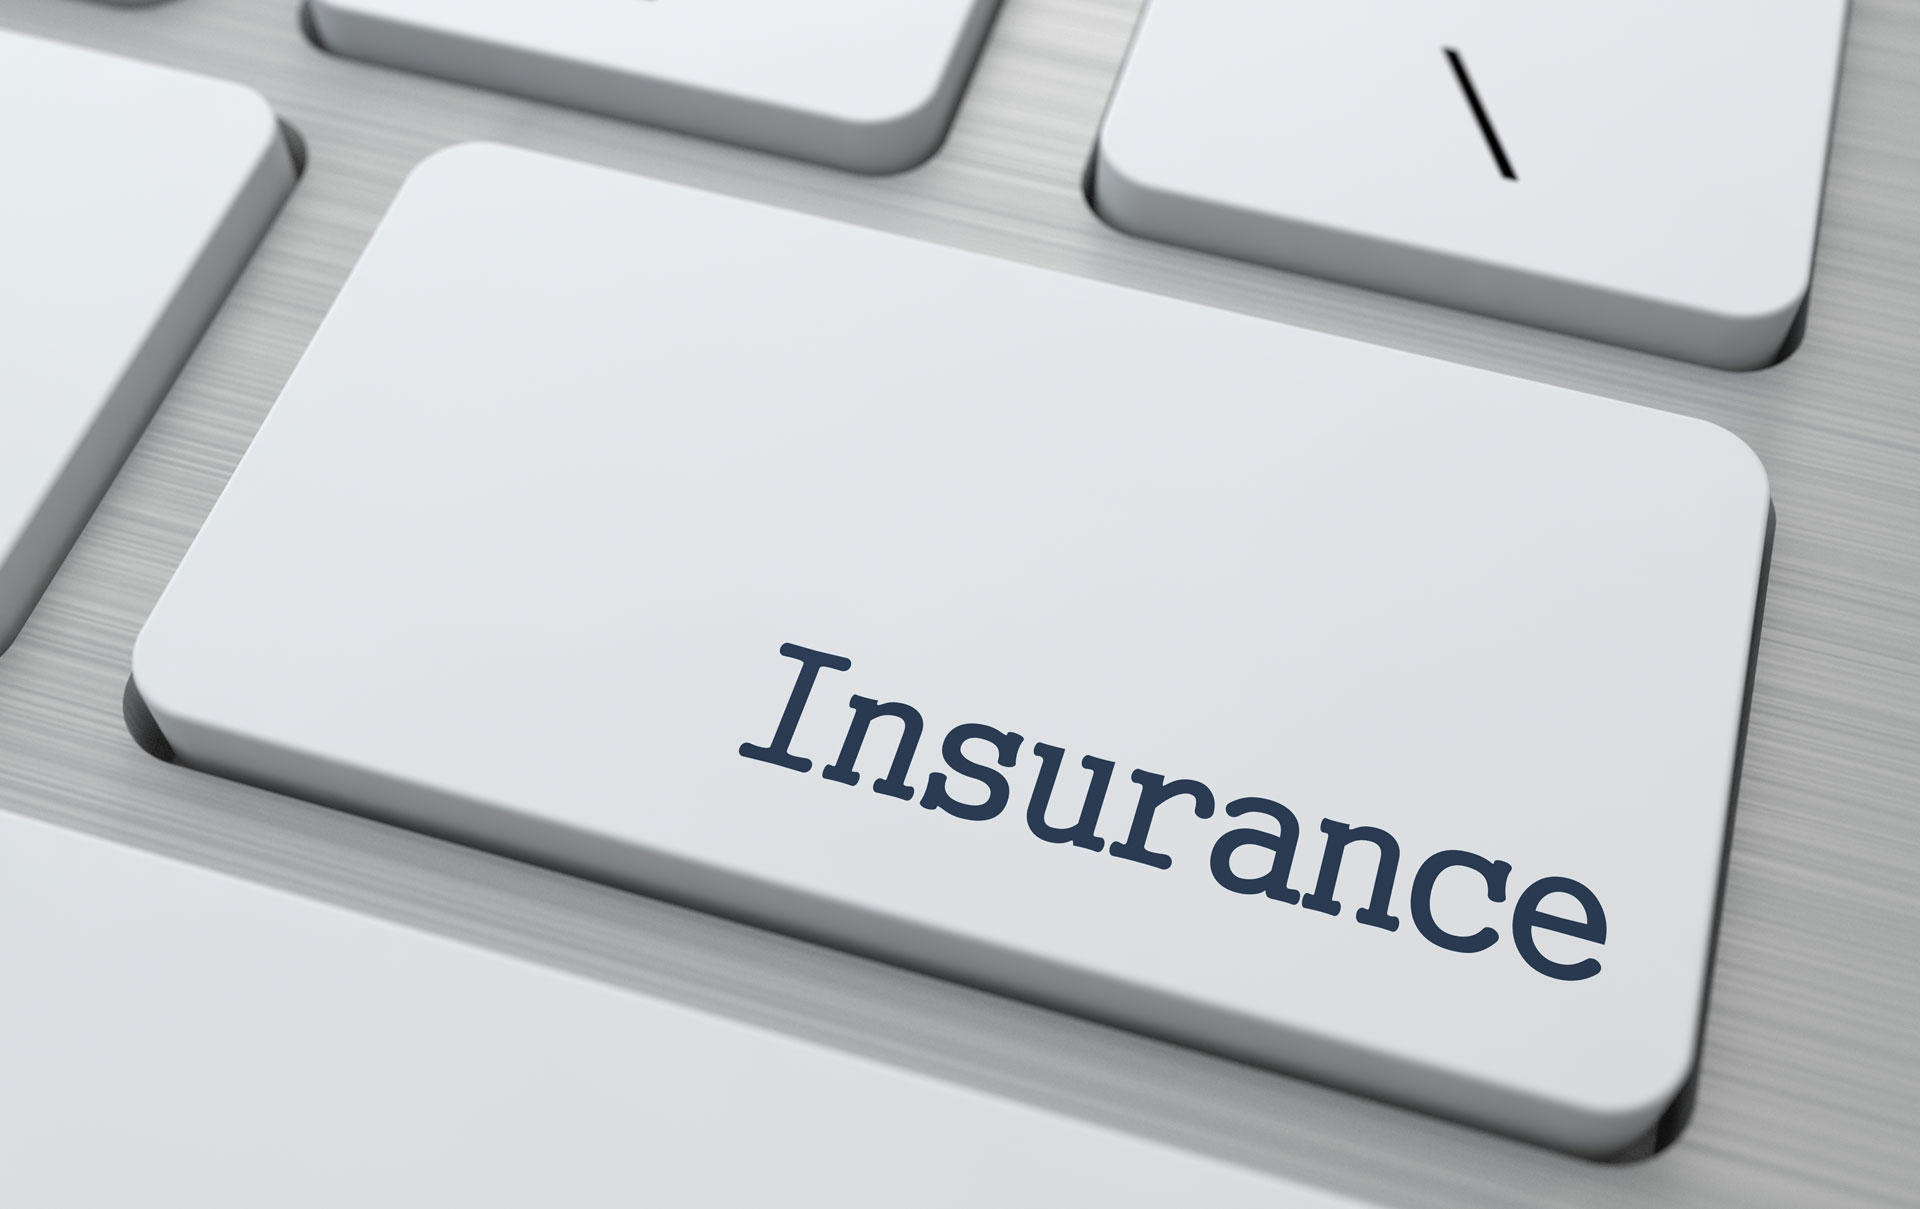 Who will disrupt the insurance industry?